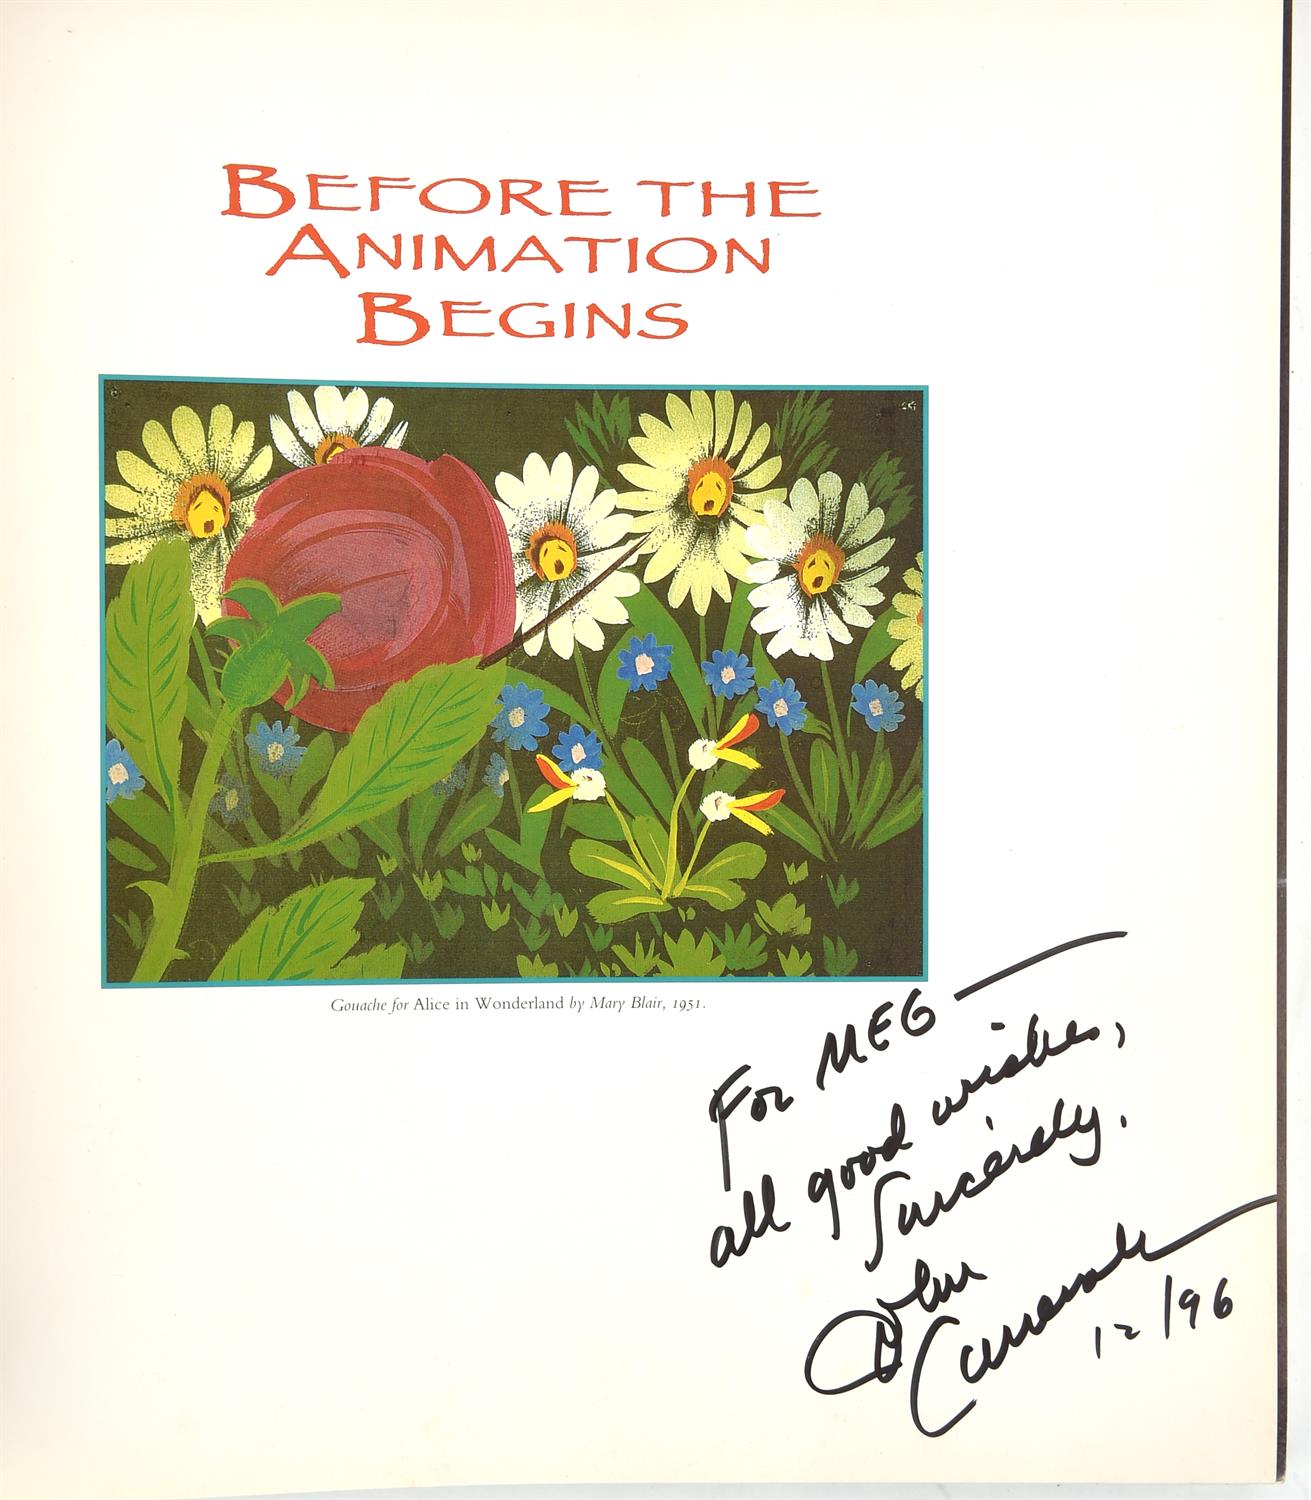 Walt Disney, Animation, and related – Five first edition hardback books, three of which are Signed - Image 3 of 4